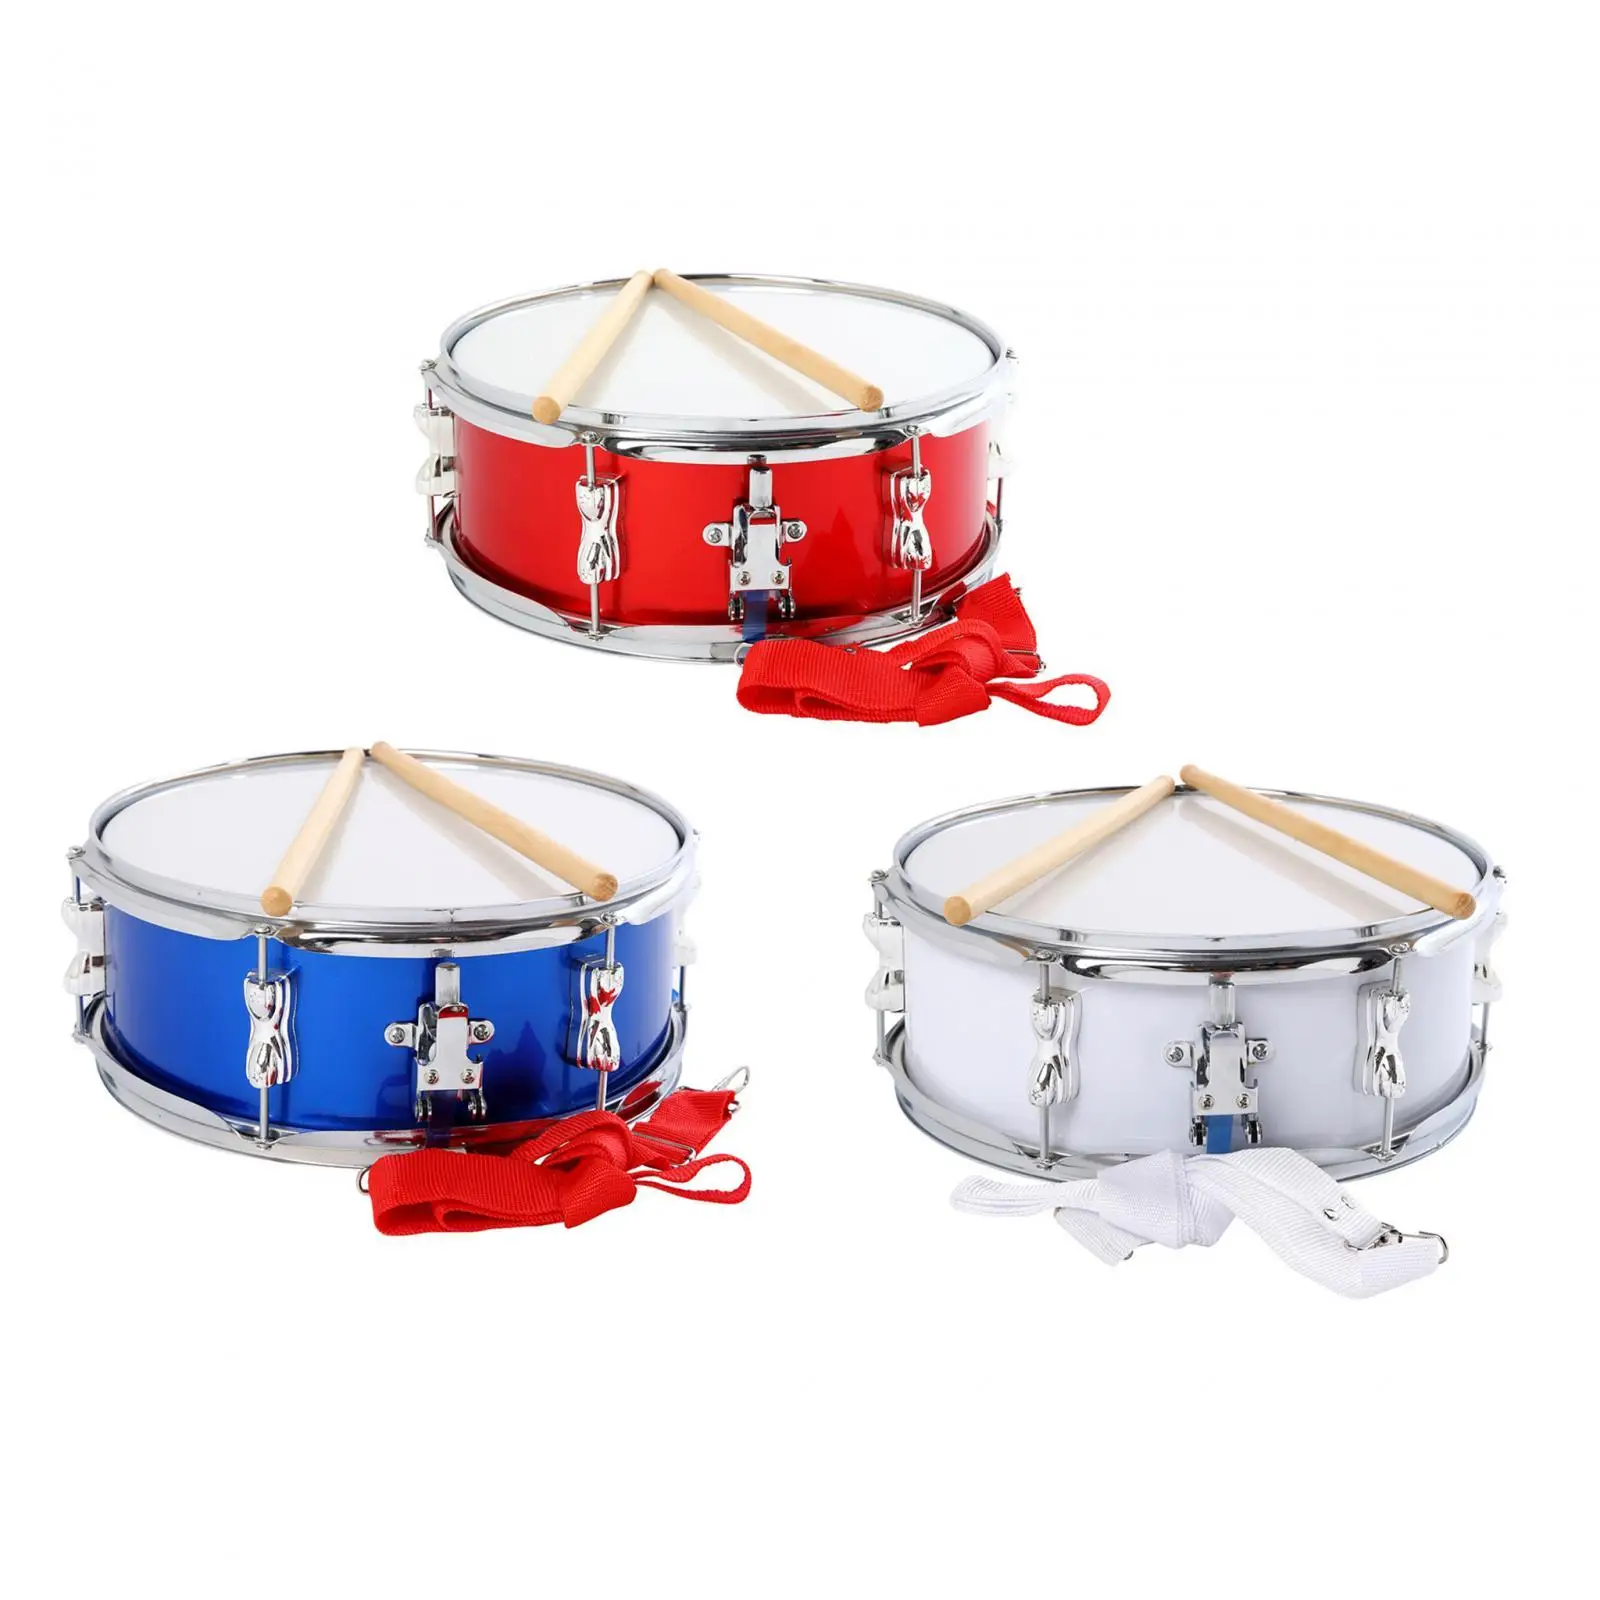 

13inch Snare Drum Educational Toy Lightweight with Shoulder Strap Music Drums for Kids Teens Beginners Boys Girls Children